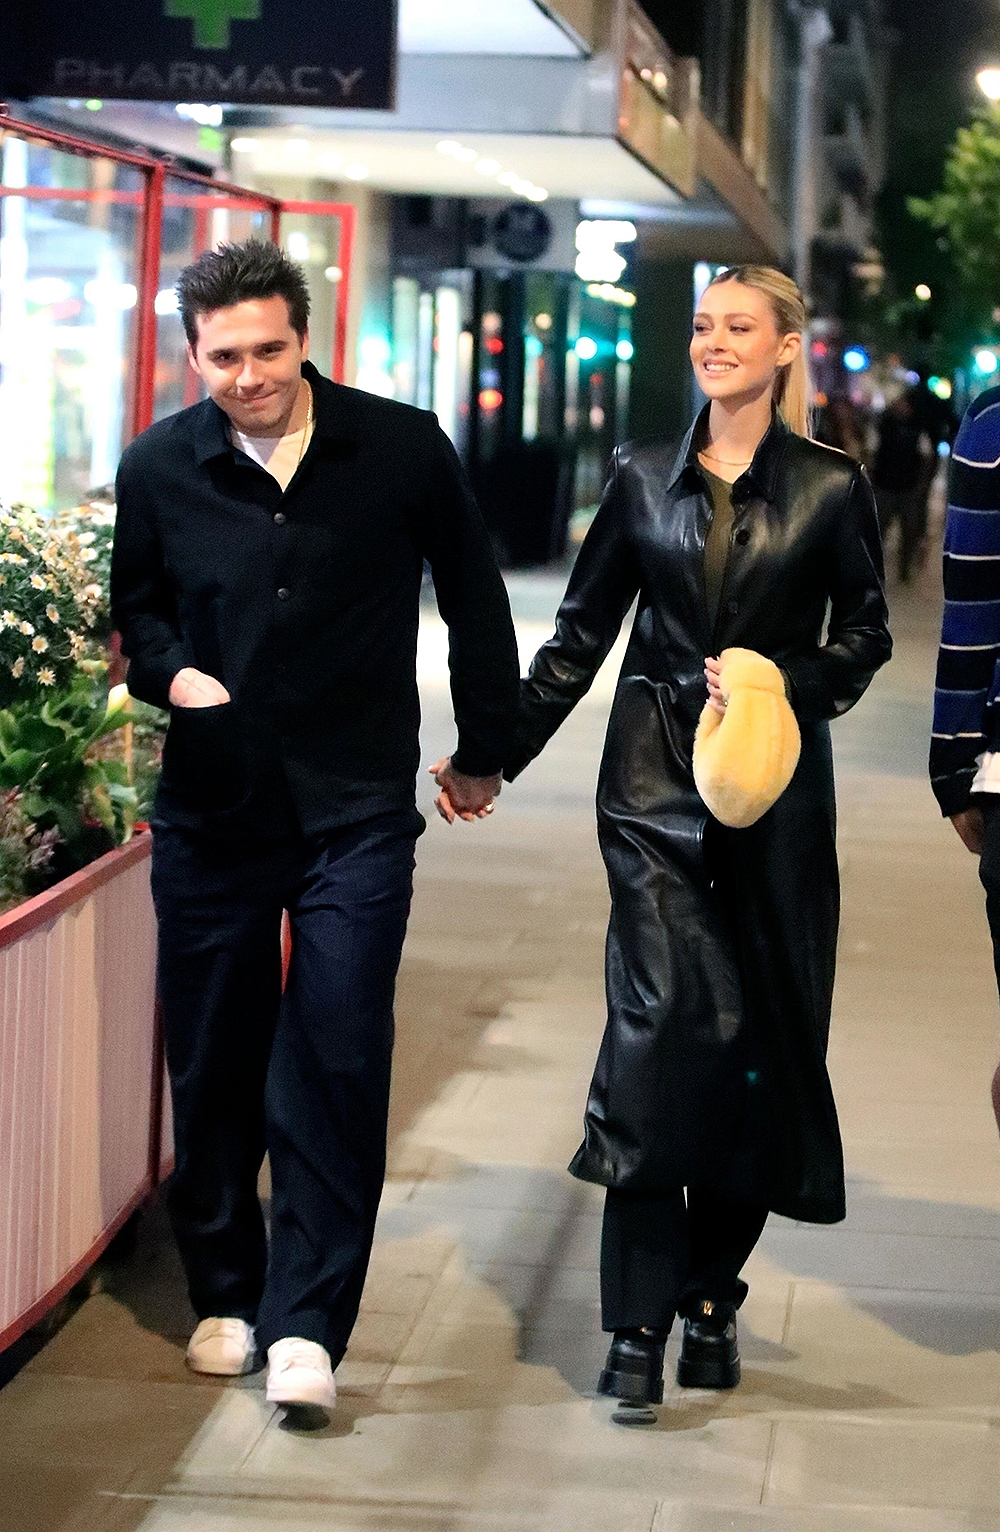 London, UNITED KINGDOM - *EXCLUSIVE* - Smiling like the cat who's got the cream, Brooklyn Beckham still seems smitten and very much in love as he holds his new wife Nicola Peltz's hand on an evening out in London.The couple is pictured for the first time back in the UK since tying the knot at their lavish wedding as the newlyweds look happy on a night out at the Chiltern Firehouse. Nicola showed off her sparkling wedding ring whilst locking arms with her man Brooklyn.Pictured: Brooklyn Beckham, Nicola PeltzBACKGRID USA 13 MAY 2022 USA: +1 310 798 9111 / usasales@backgrid.comUK: +44 208 344 2007 / uksales@backgrid.com*UK Clients - Pictures Containing ChildrenPlease Pixelate Face Prior To Publication*